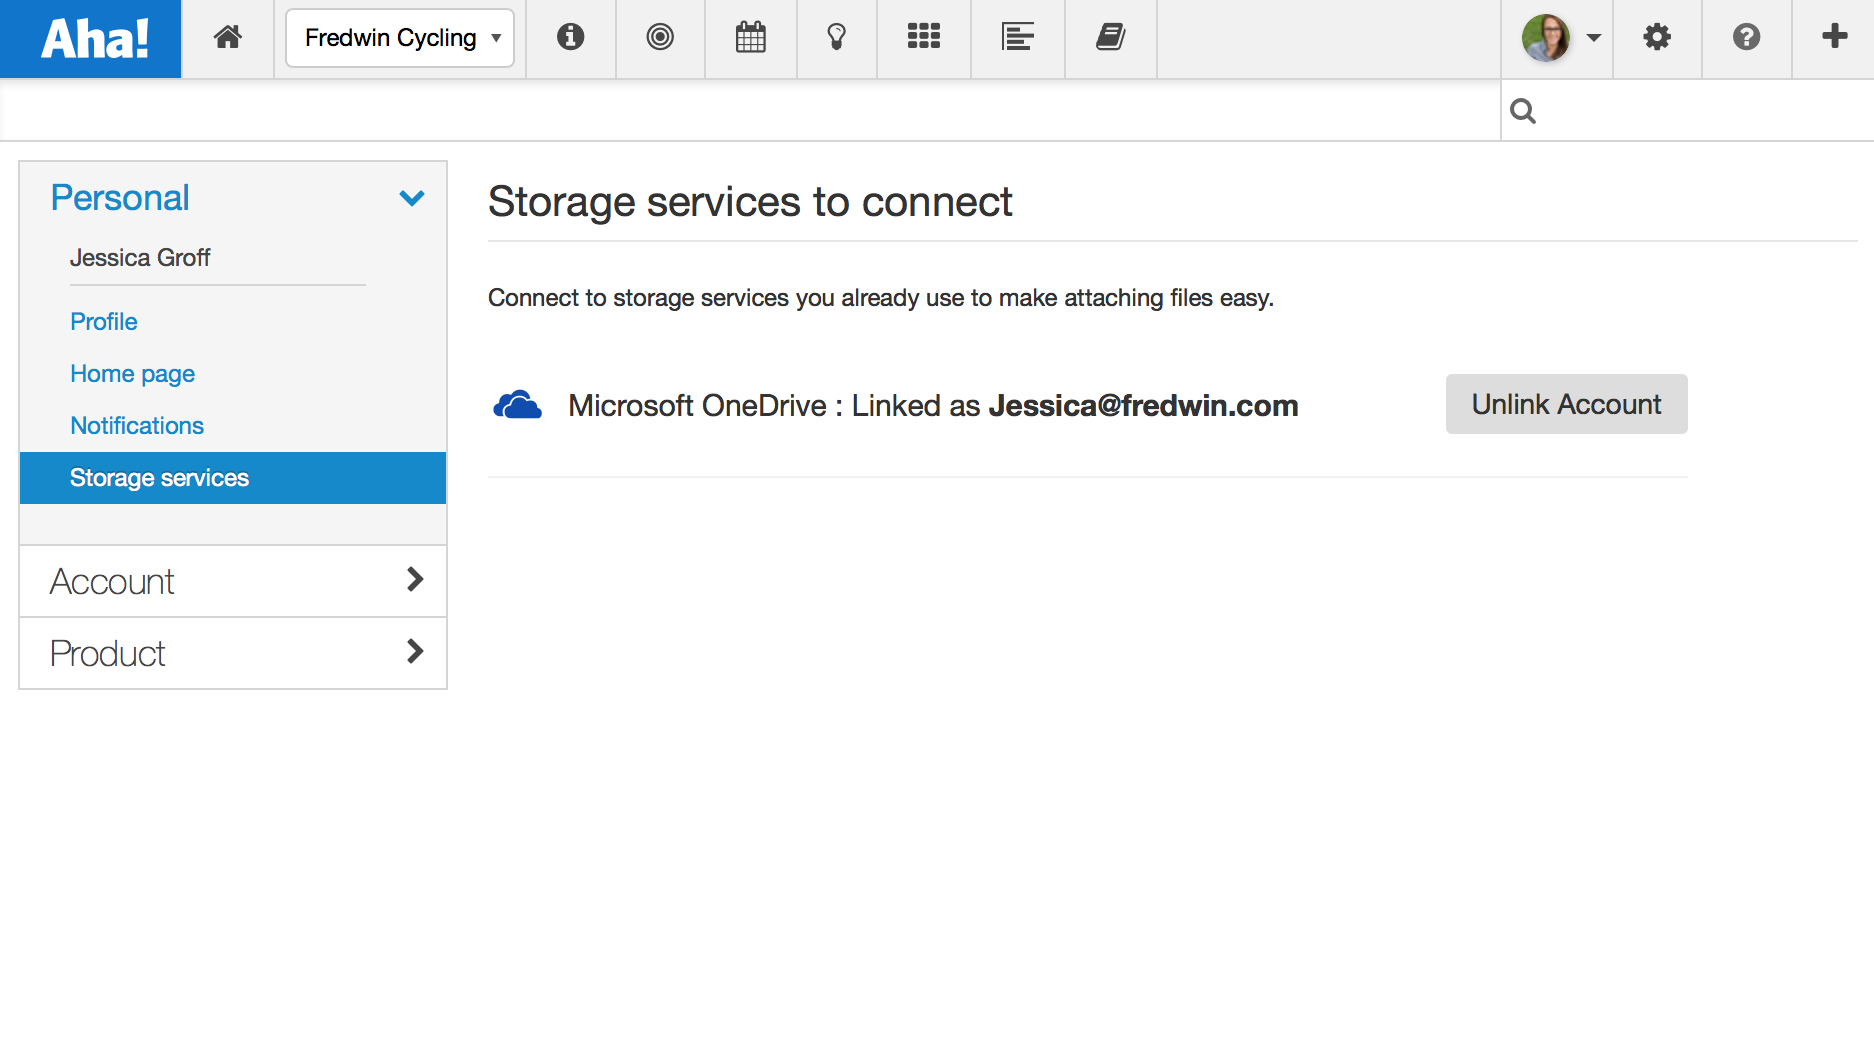 Blog - Just Launched! — Aha! Now Integrated With Microsoft OneDrive - inline image